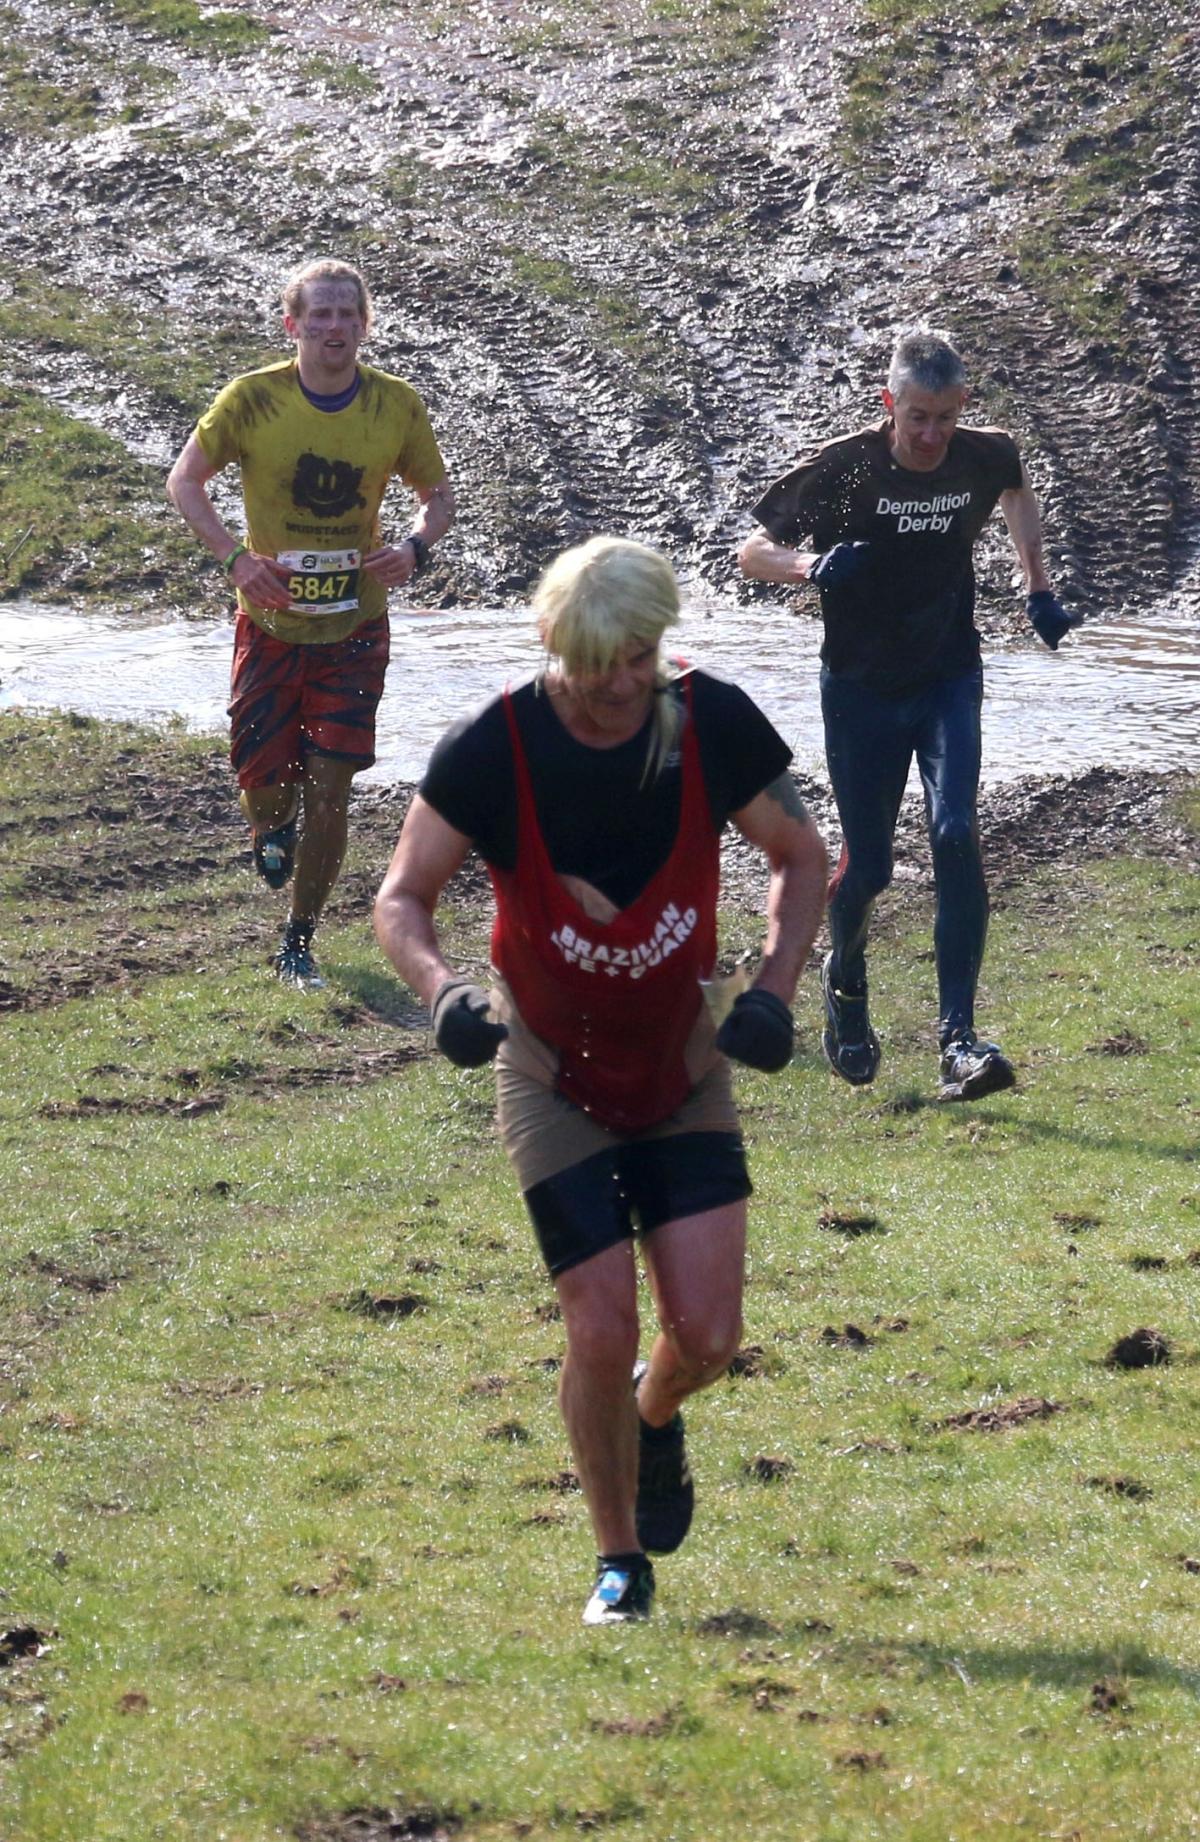 Hundreds of runners took on the ‘Major Midlands’ challenge in the Ragley Estate on Saturday, March 12.